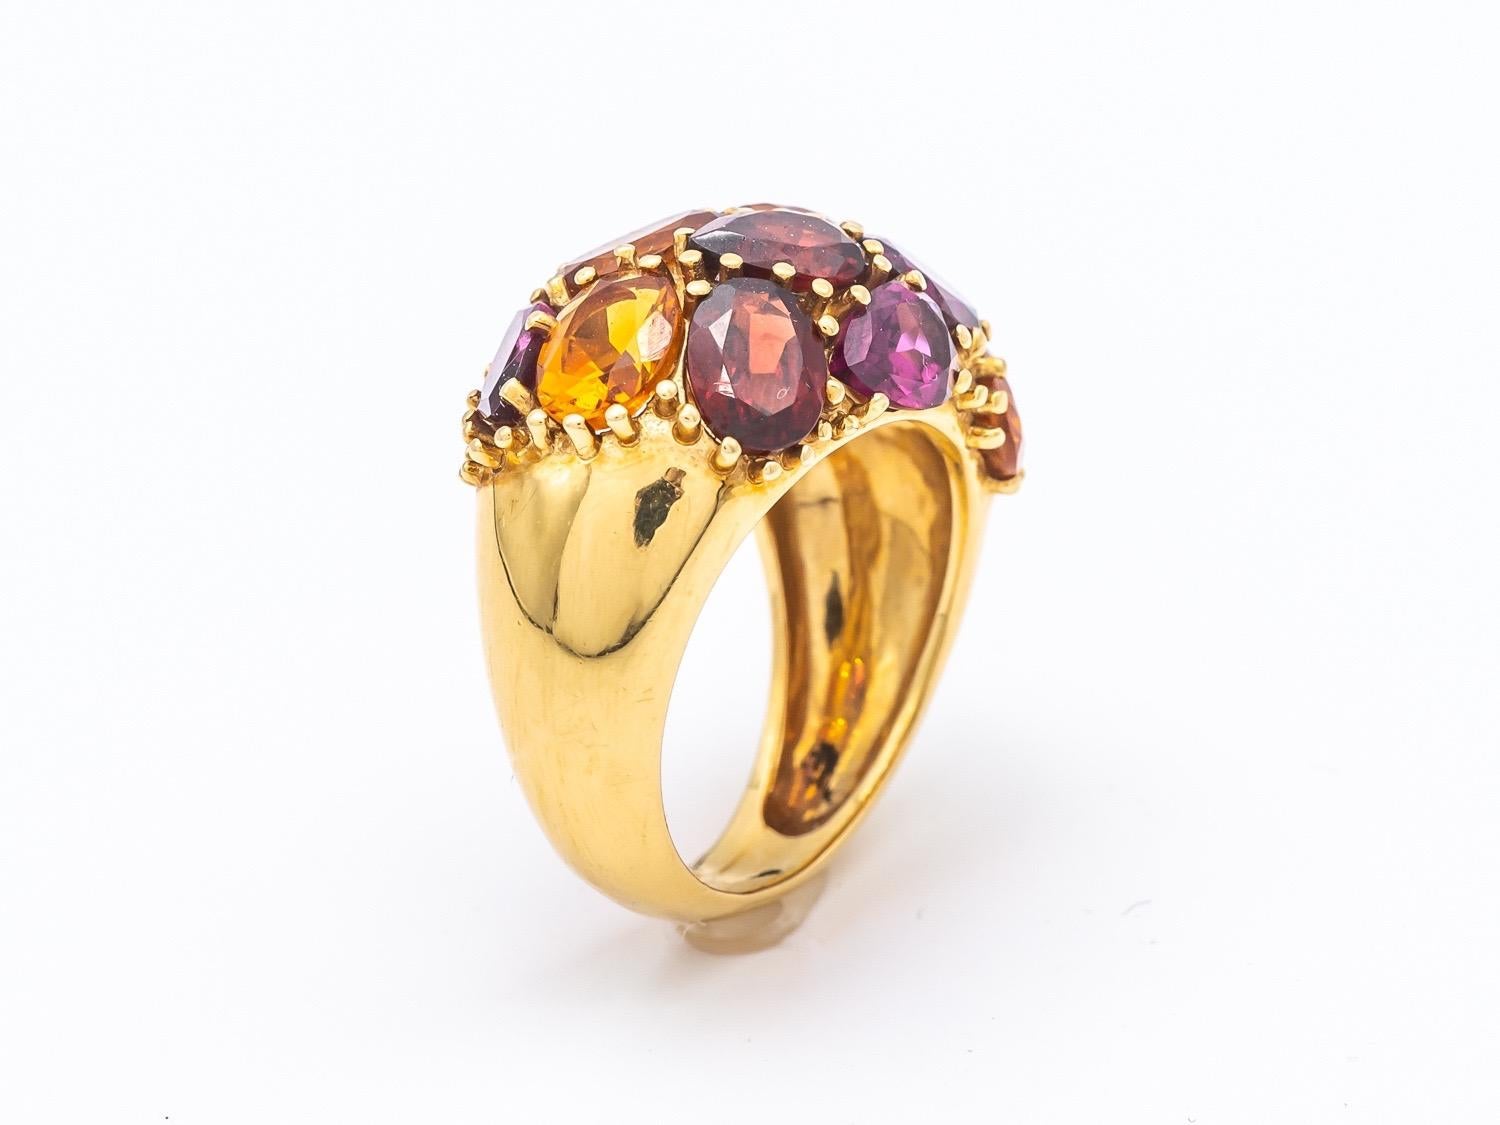 Discover the exquisite beauty of this Dome Ring in 18-carat yellow gold, sumptuously set with Garnets, Citrines and Rhodolite. This remarkable piece is a true masterpiece that combines elegance and refinement, while meeting 1st Dibs benchmark